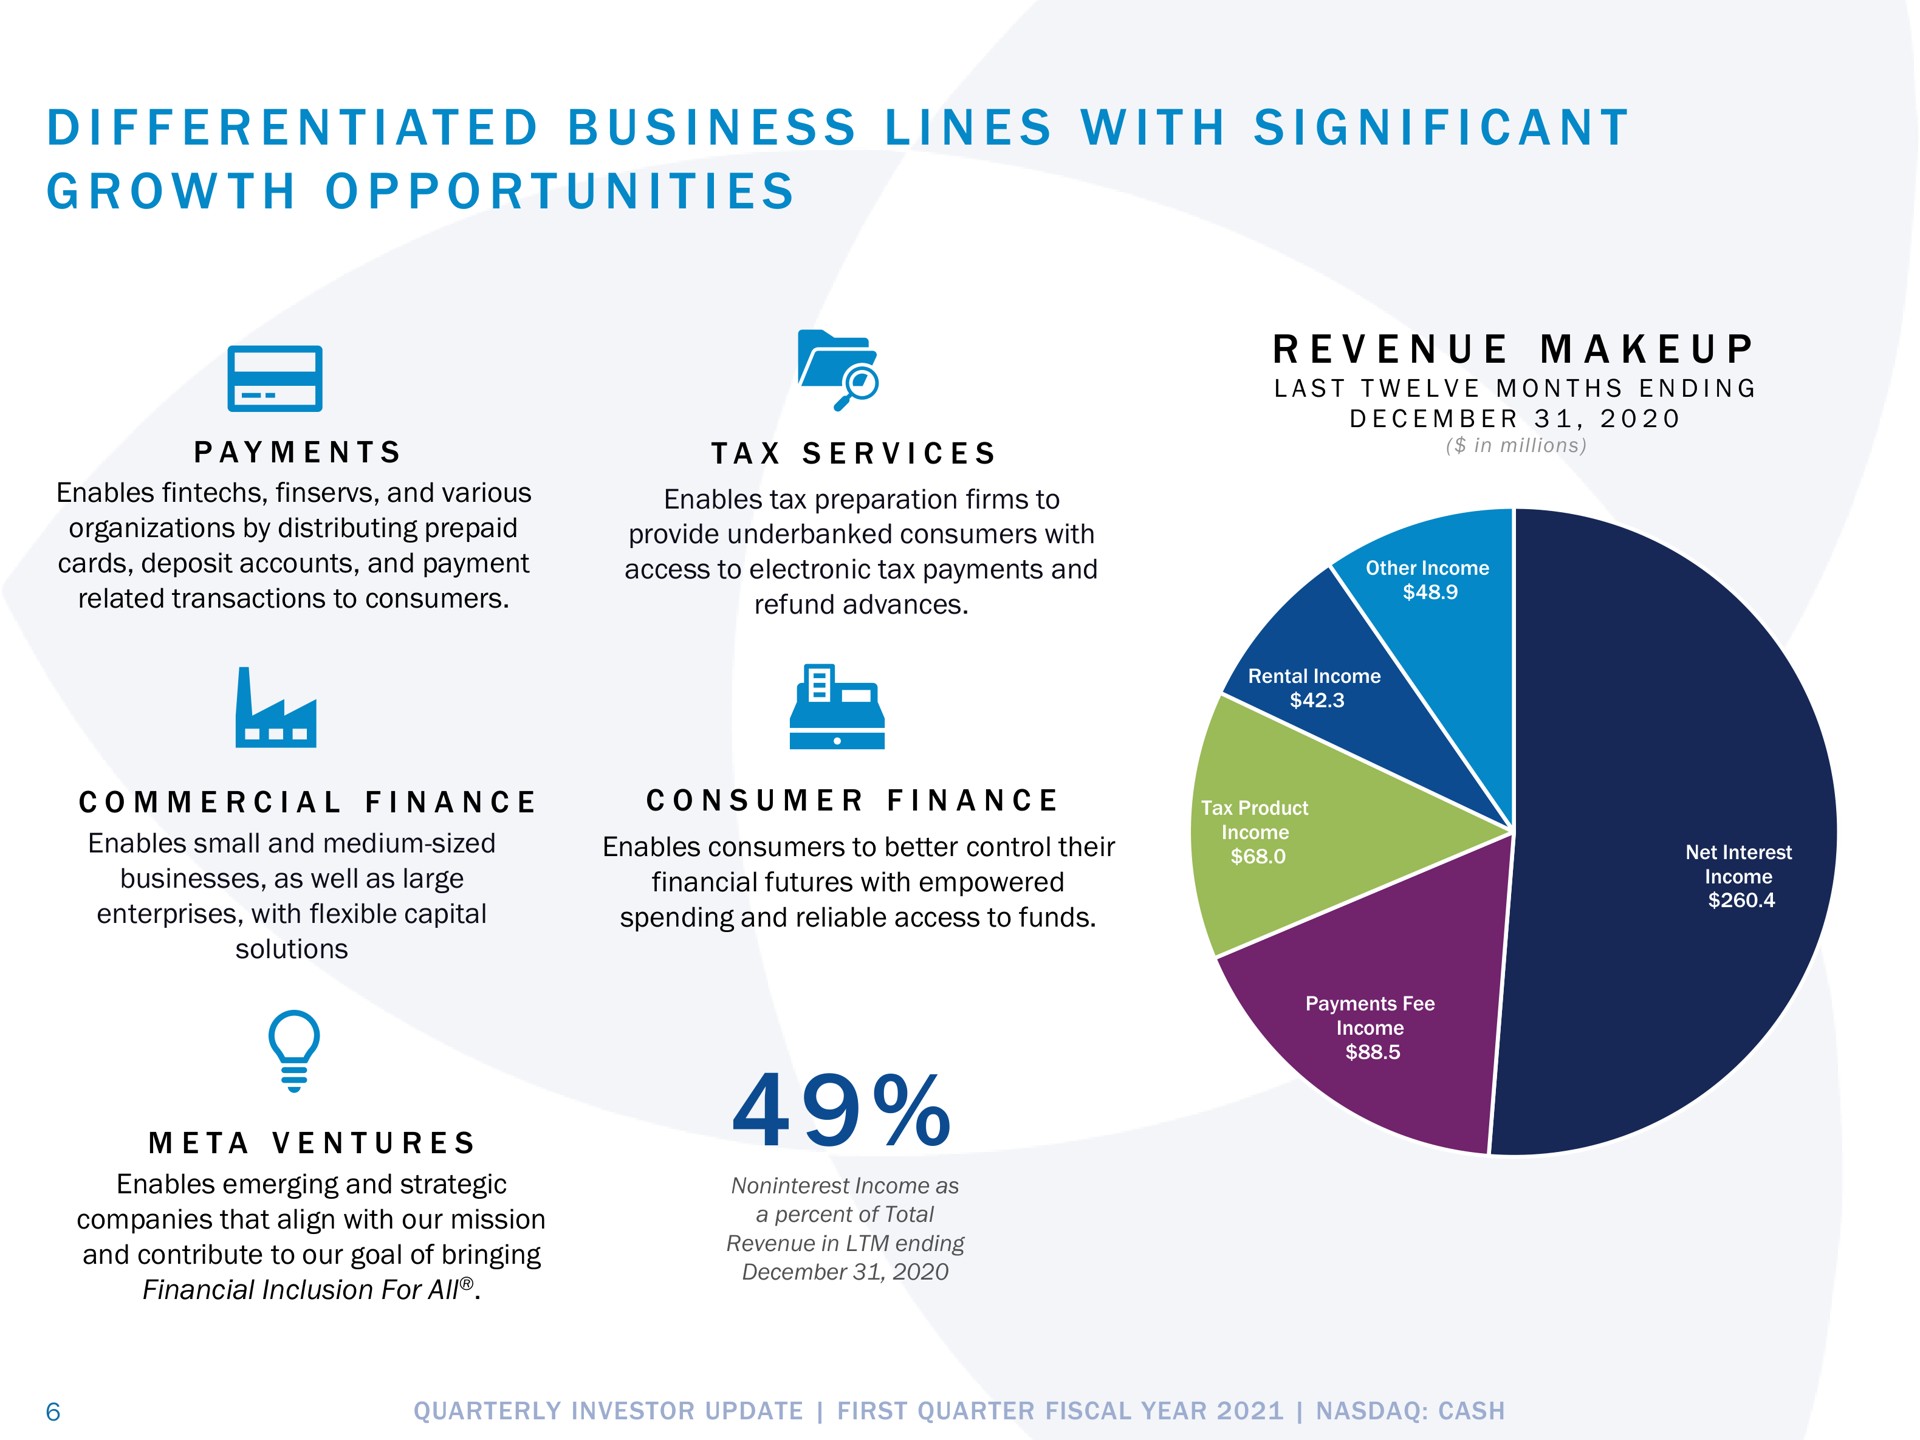 i i at i i i i i i a i i a differentiated business lines with growth opportunities significant me revenue | Pathward Financial